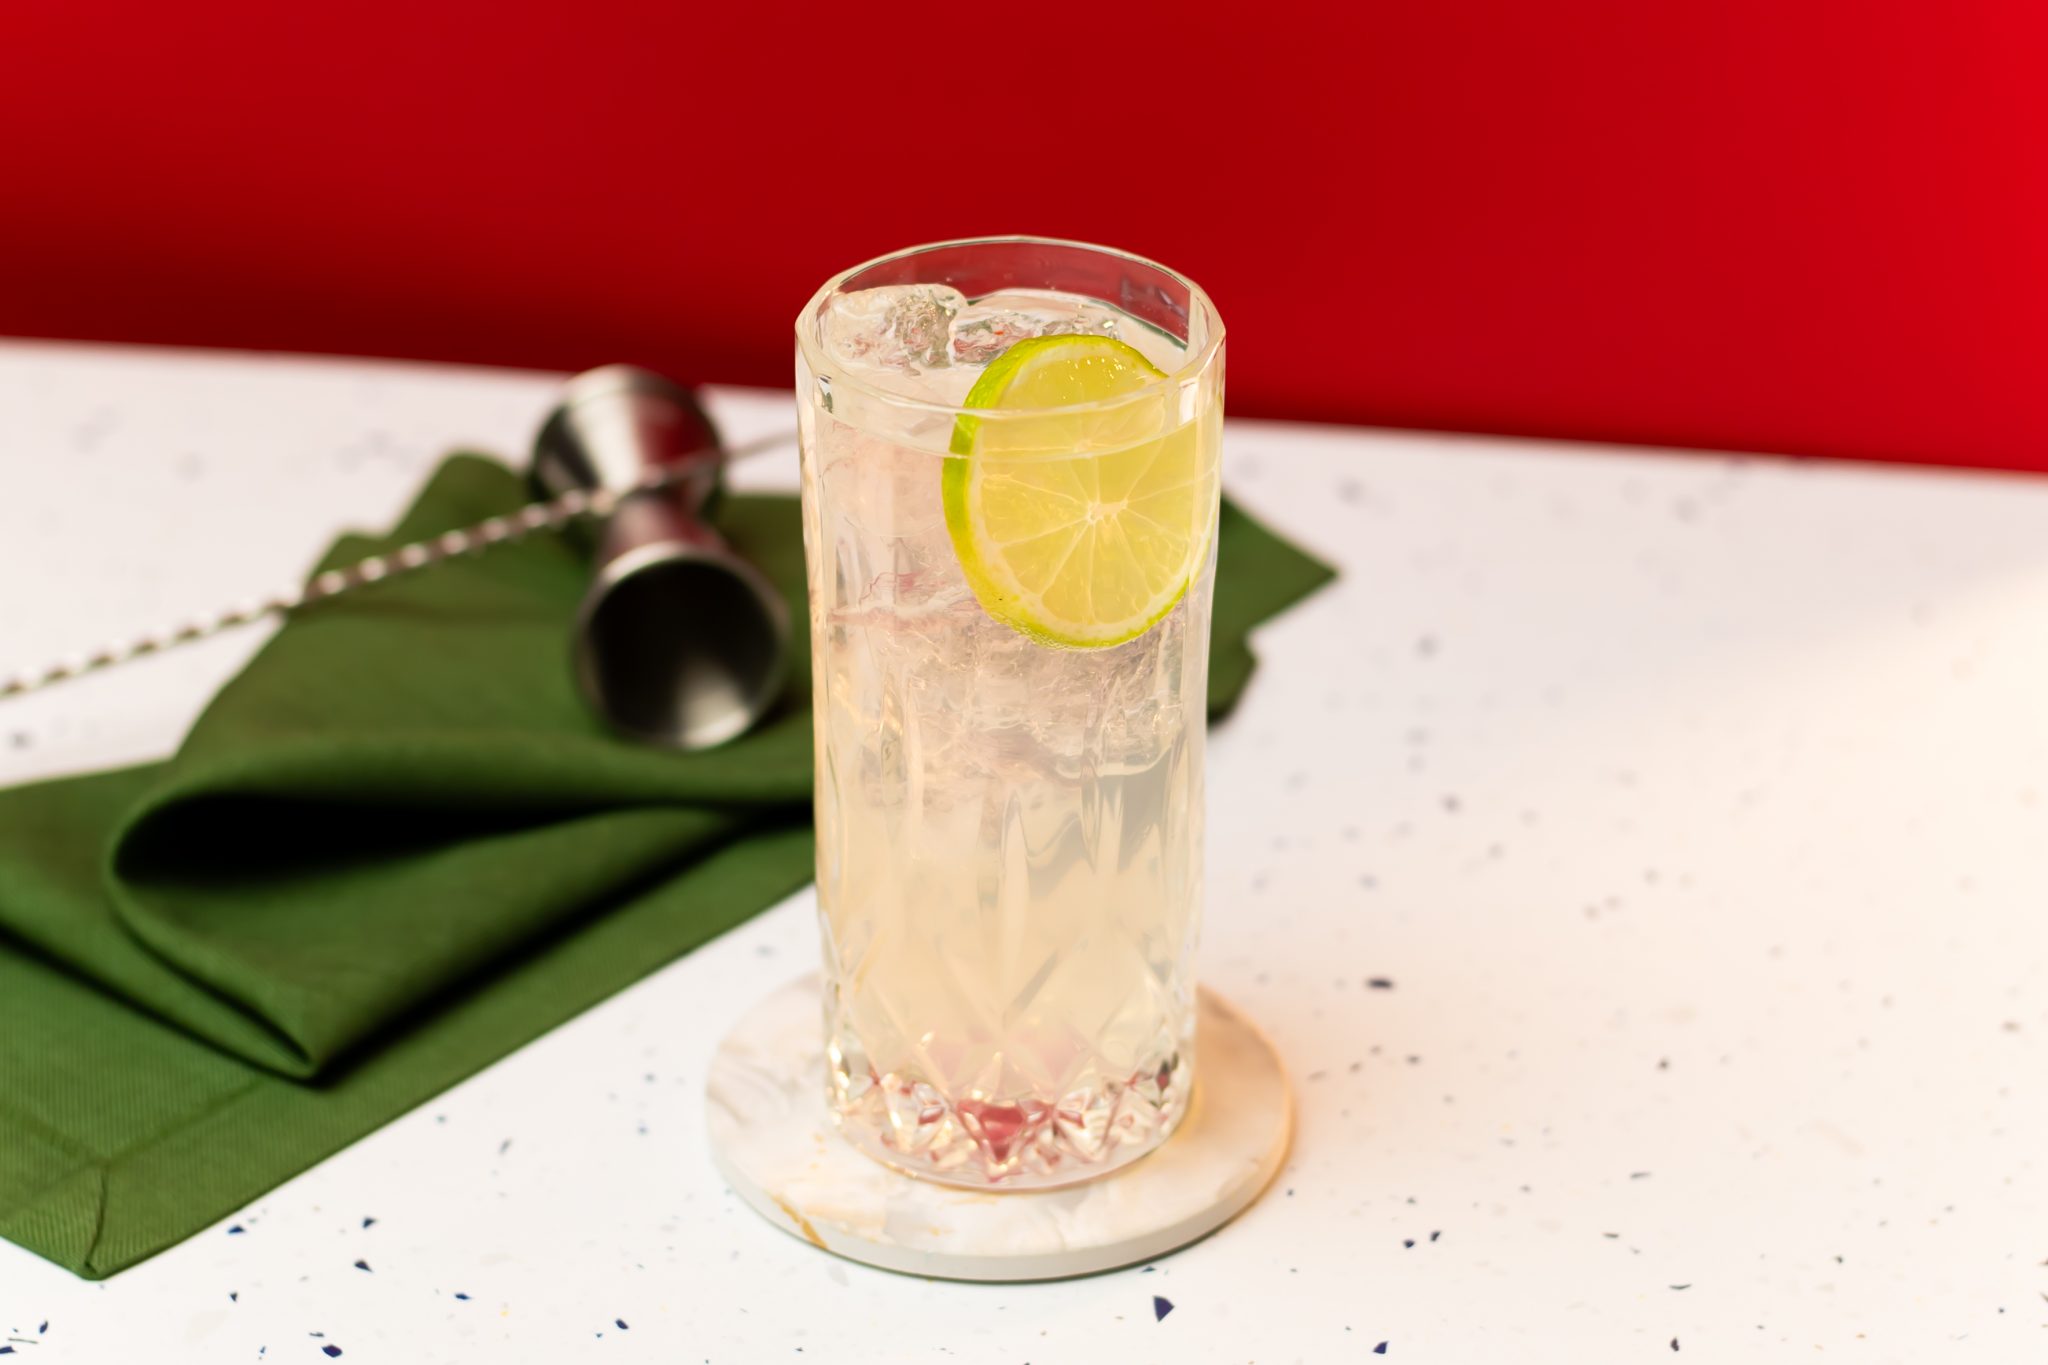 A side shot of a Pisco Collins cocktail in a highball glass on a white coaster placed on a white surface surrounded by a jigger, a bar spoon and a green cloth, in front of a red background.